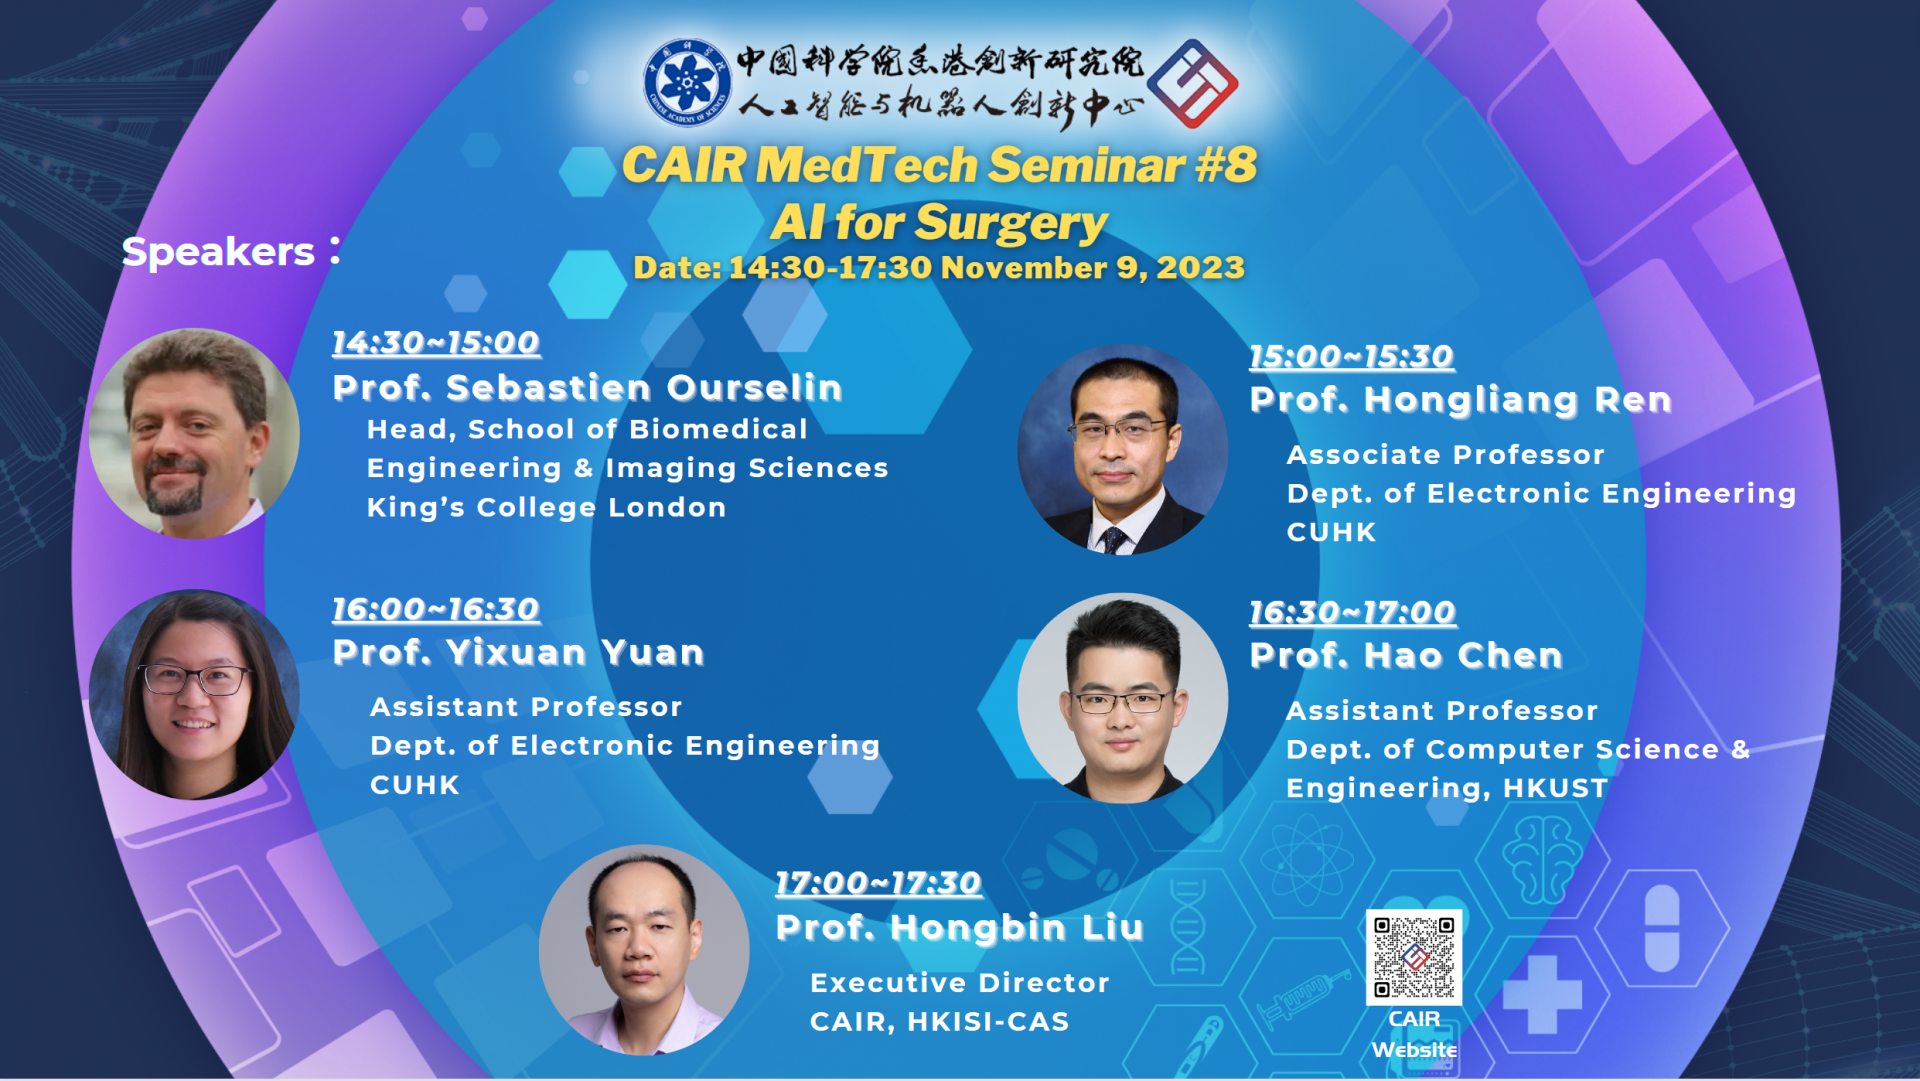 CAIR Medtech Seminar #9 Towards image guidance and autonomy in robotic neurosurgical and percutaneous procedures